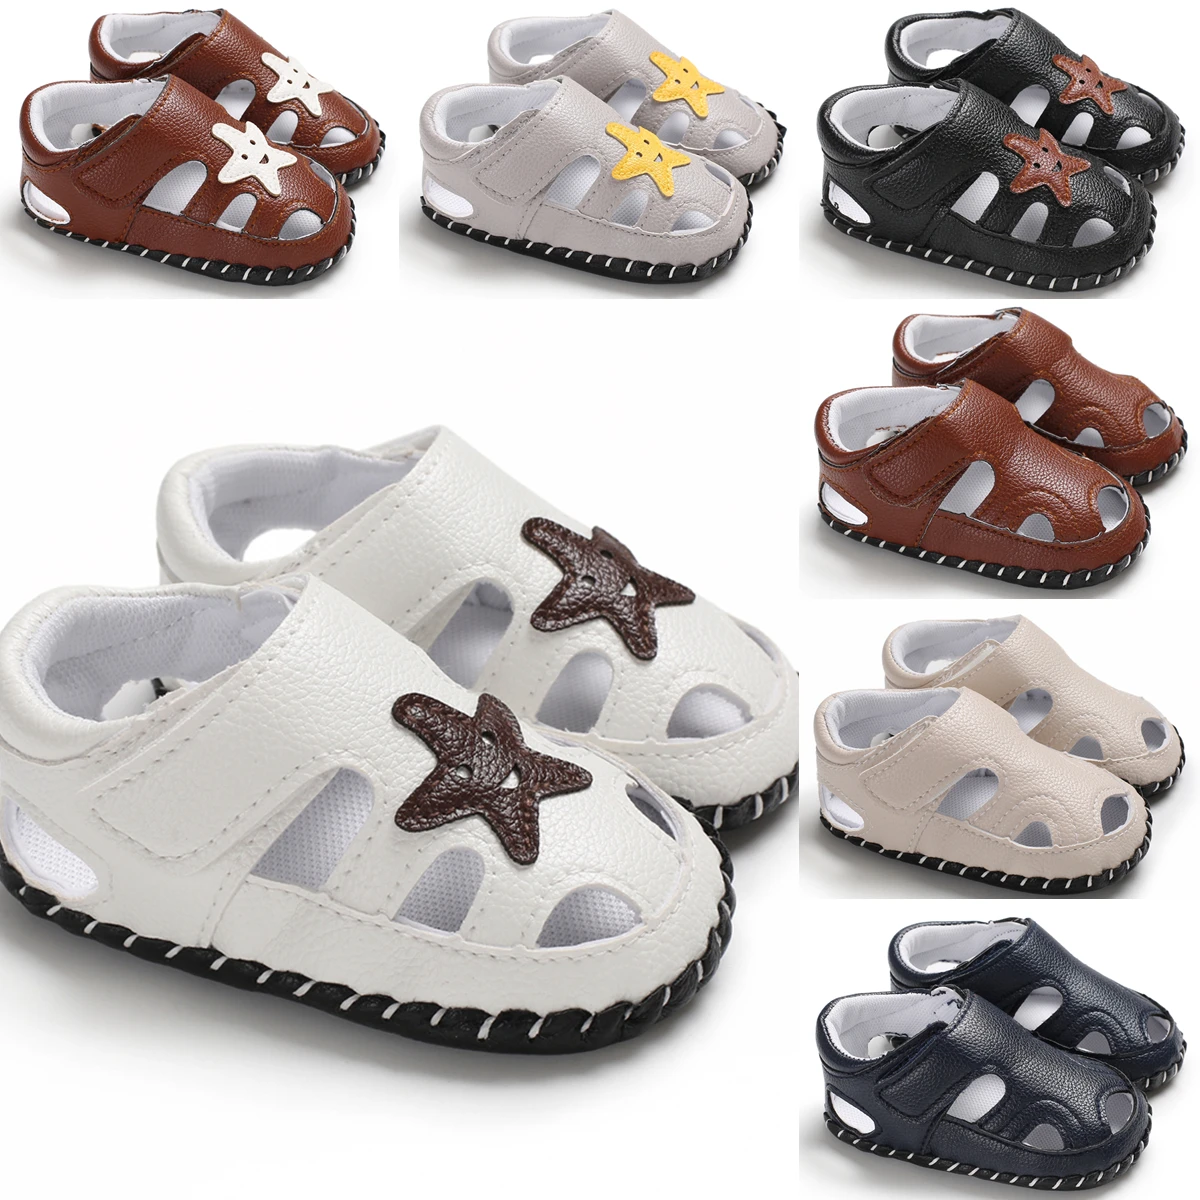 breathable summer baby girls sandals toddlers simple style solid color soft sole shoes outdoor indoor prewalker 0 18m 2022 Summer Newborn Shoes Baby Boys Sandalias Soft Leather Boys Prewalker Soft Sole Genuine Leather Sandalias 0-18M